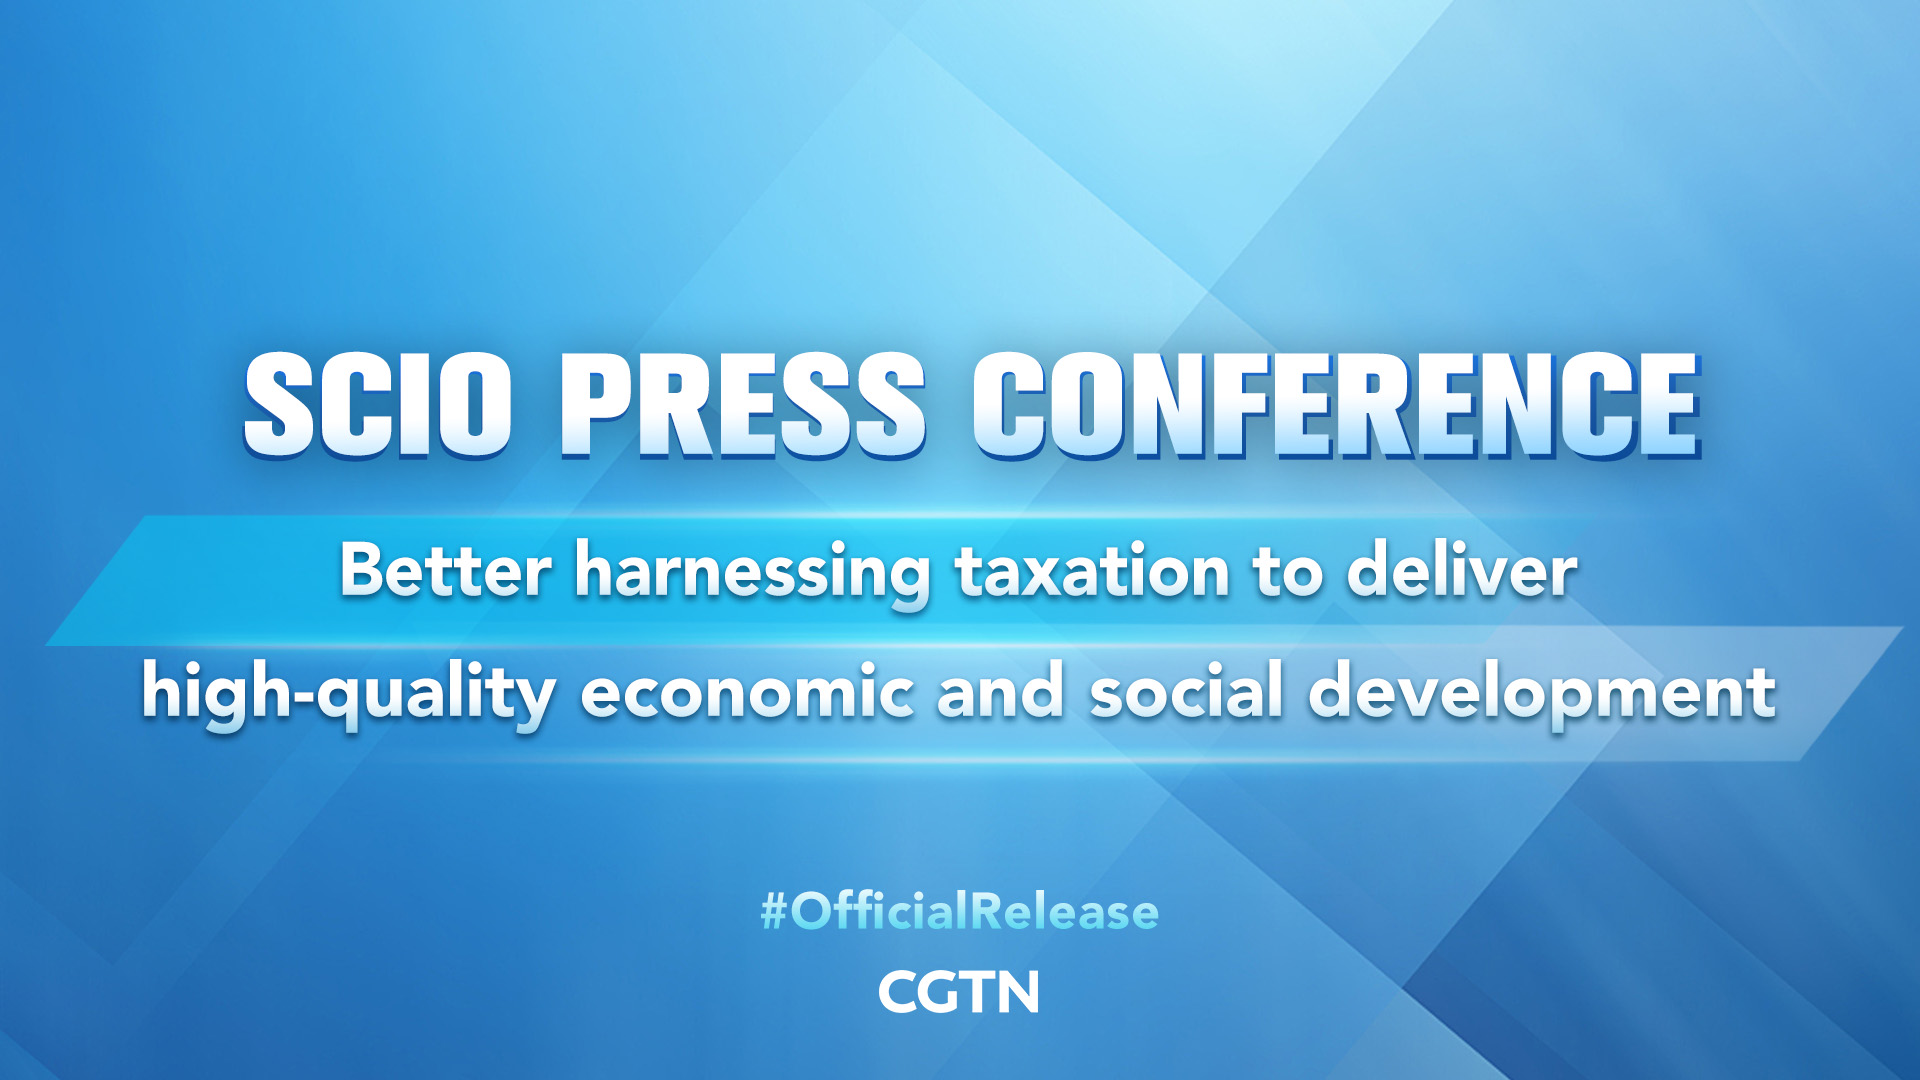 Live: SCIO briefs media on better harnessing taxation to deliver high-quality economic, social development